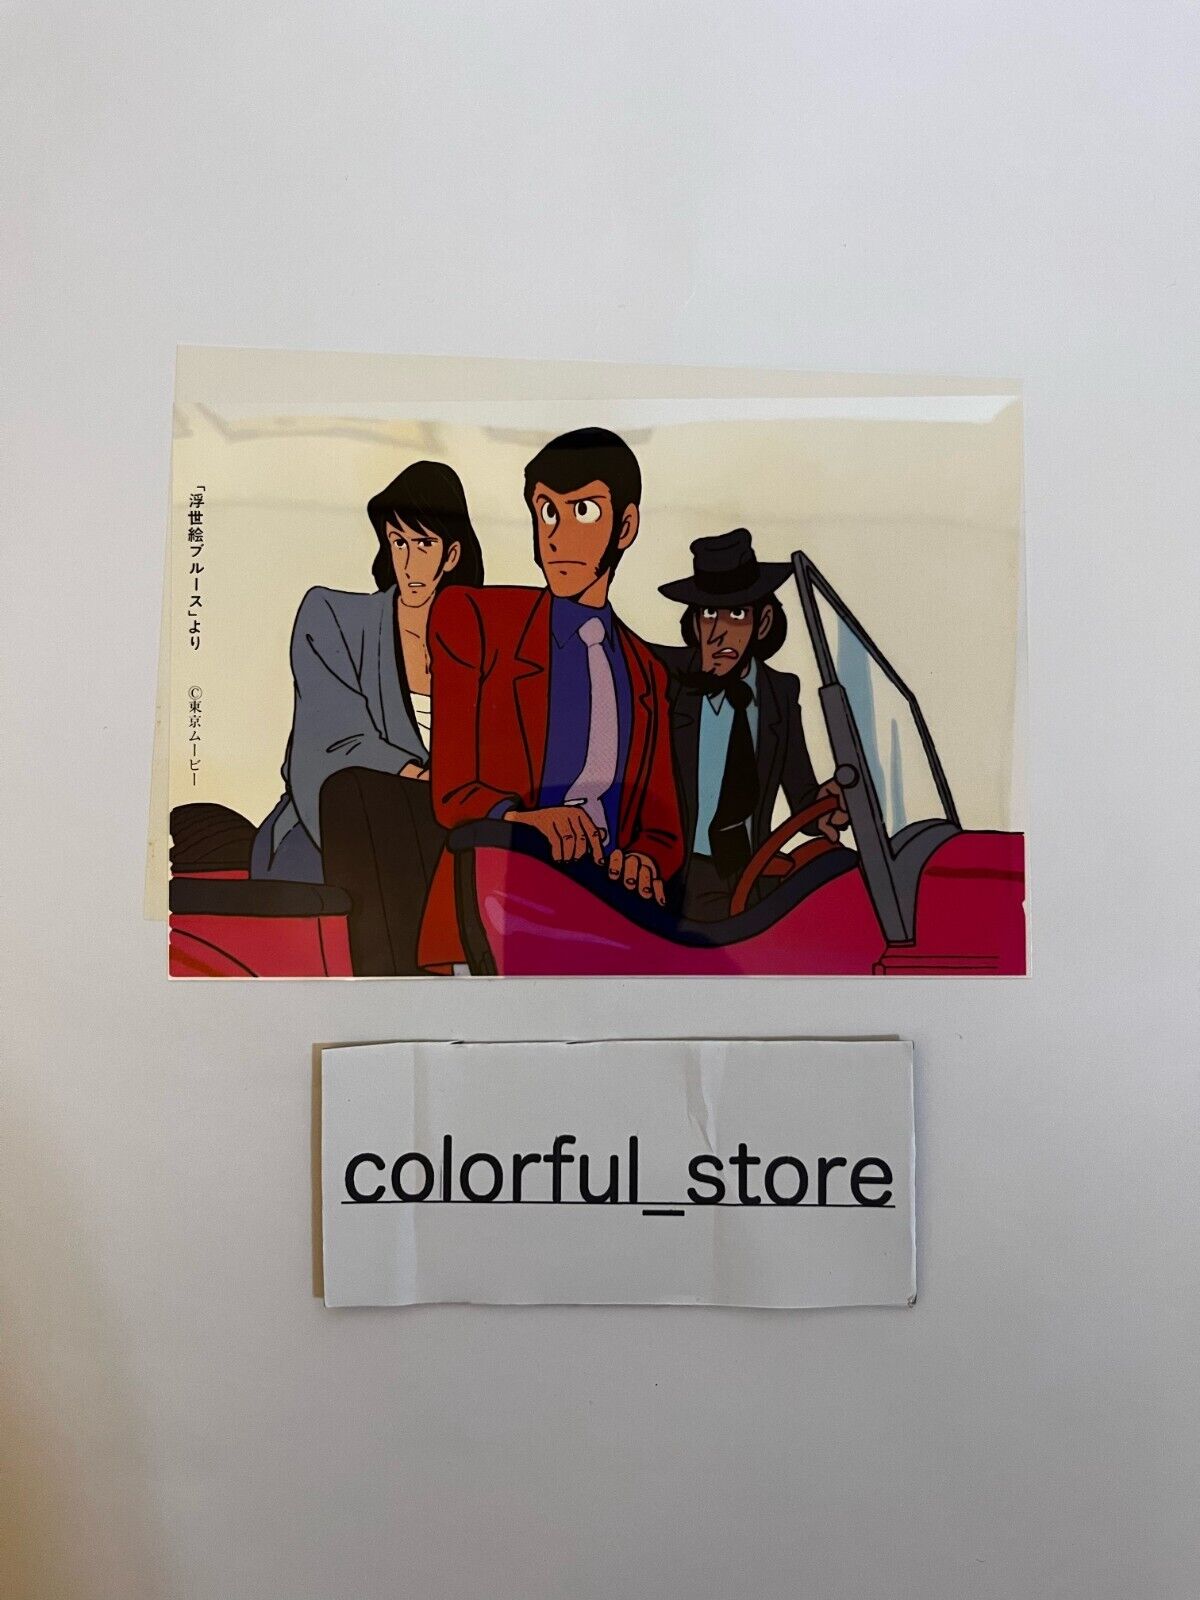 Lupin the Third 2rd III Original Cel Picture monkey punch Anime rare Excellent++